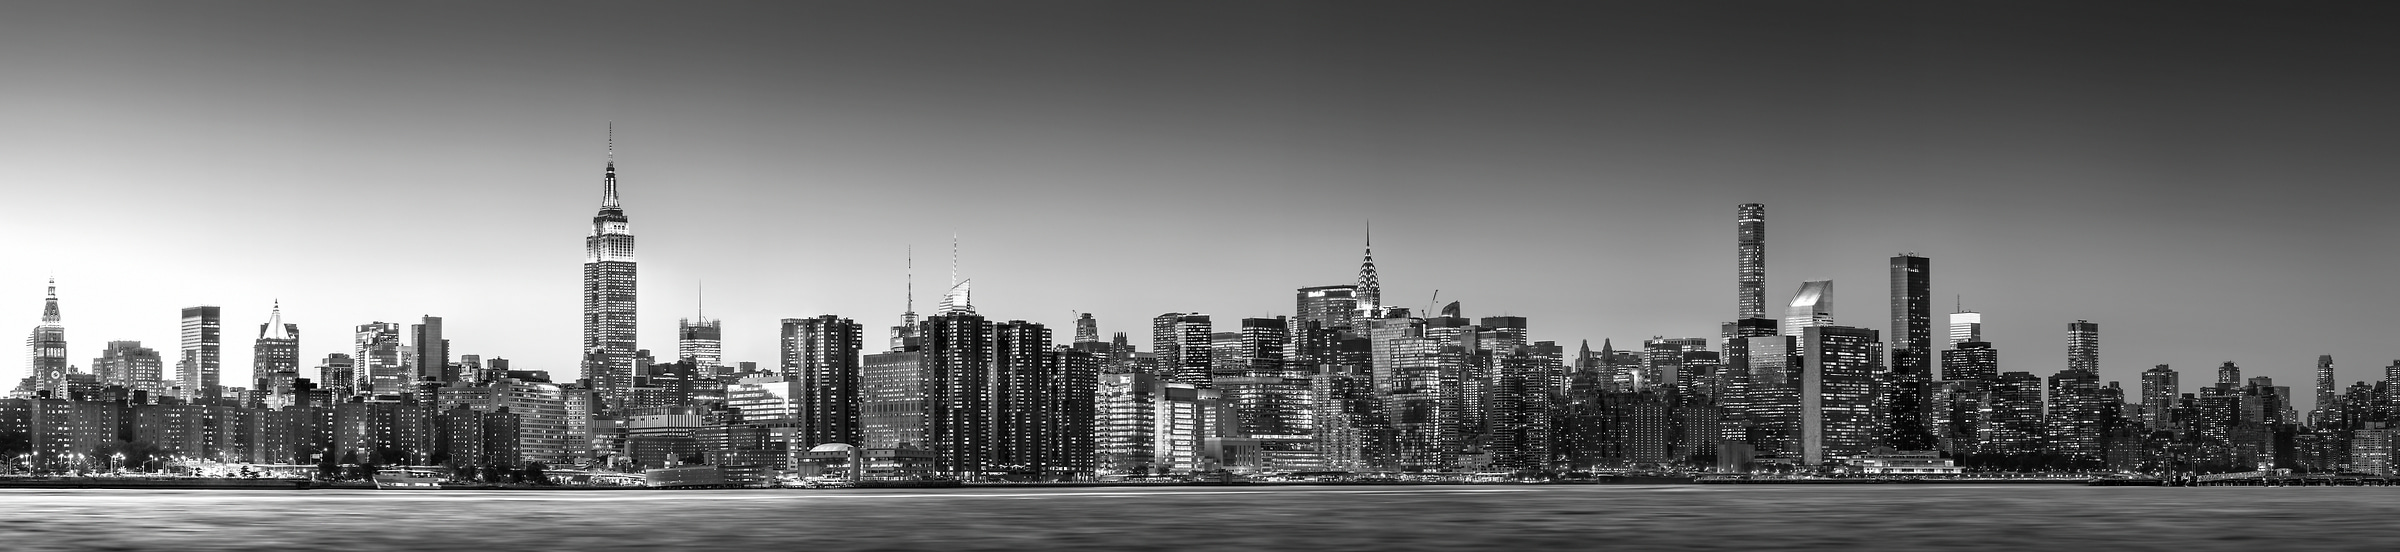 1,541 megapixels! The highest resolution cityscape VAST photo of the Midtown Manhattan city skyline in the evening sunset in New York City; created by Dan Piech.